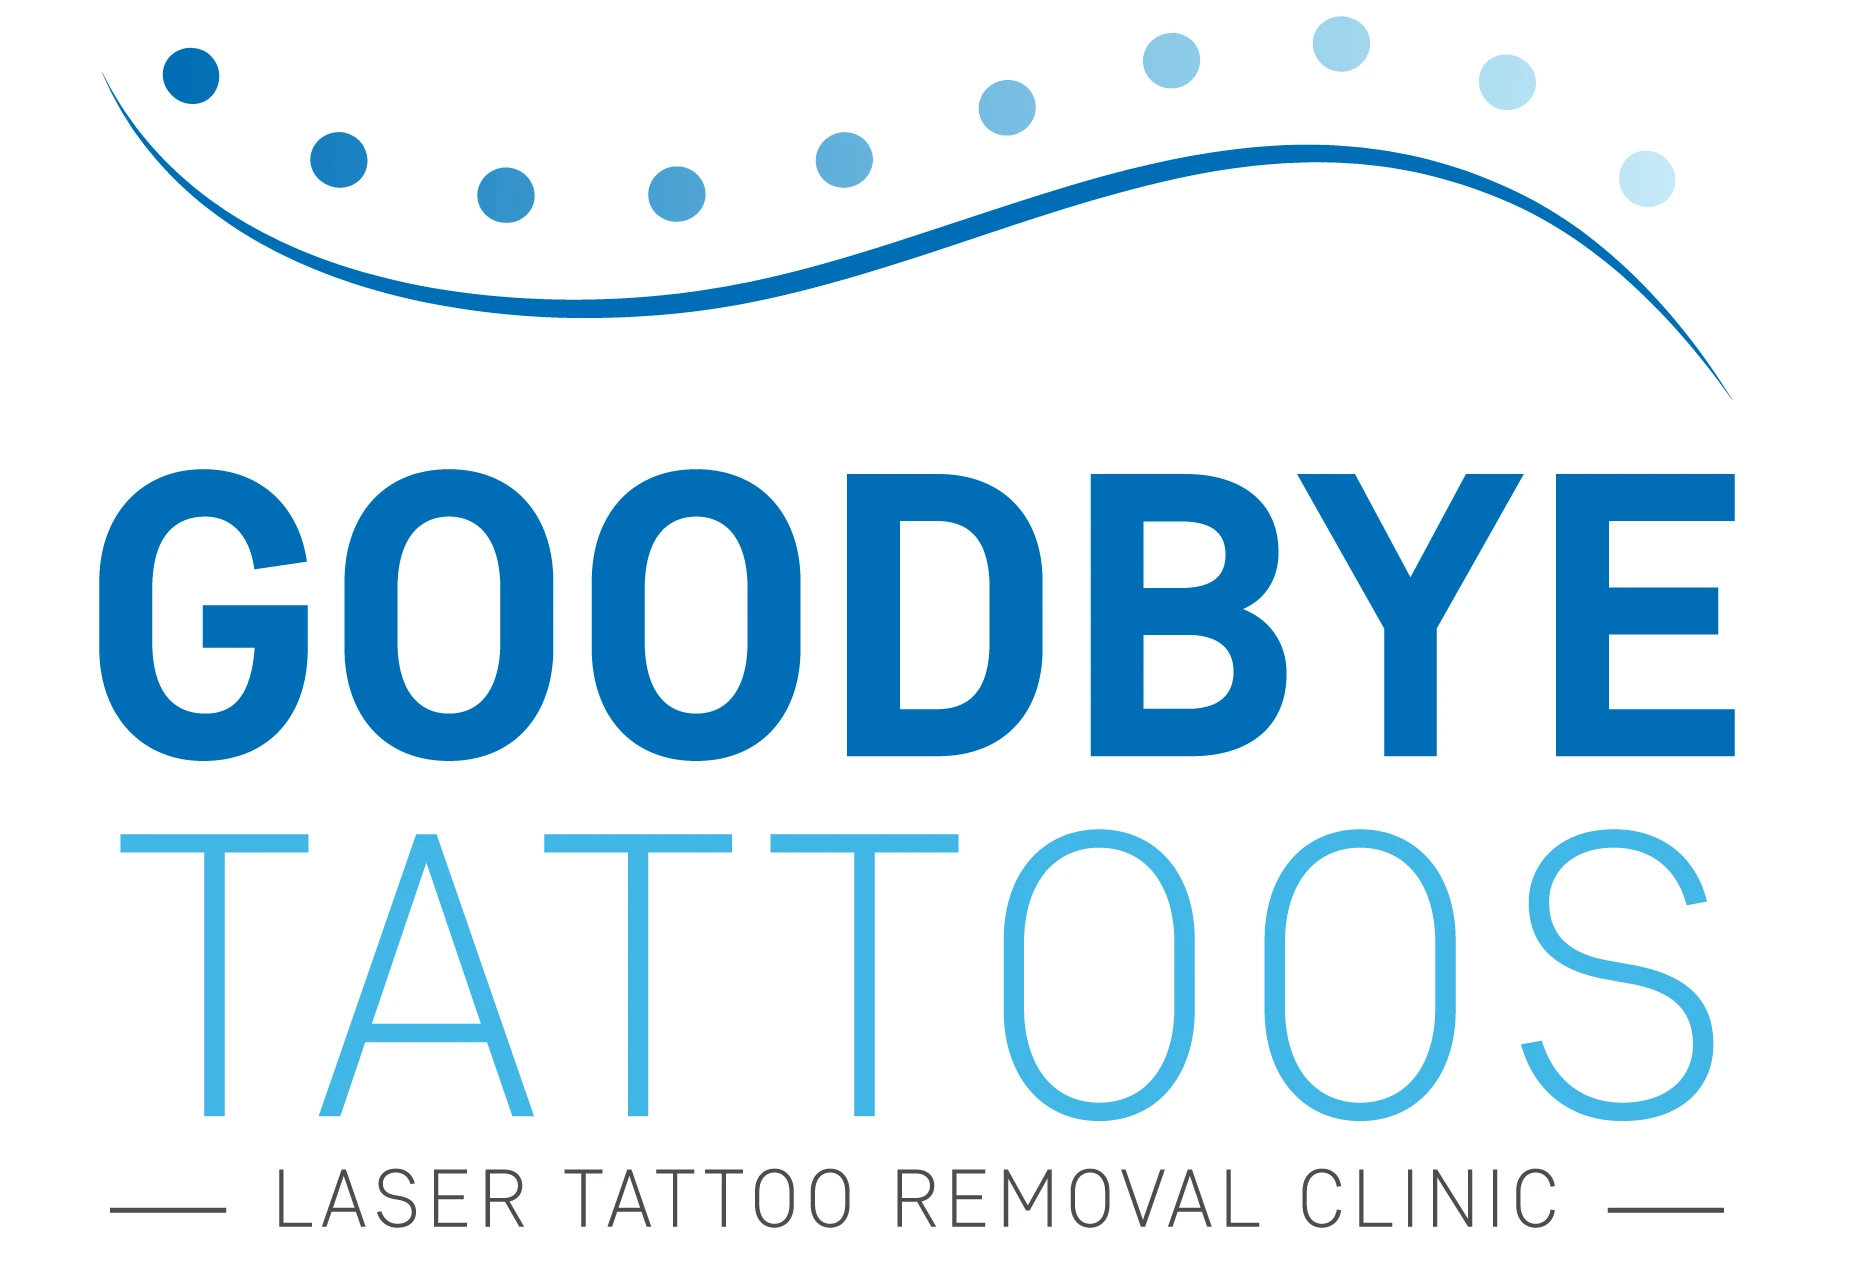 Goodbye Tattoos Laser Tattoo Removal Clinic